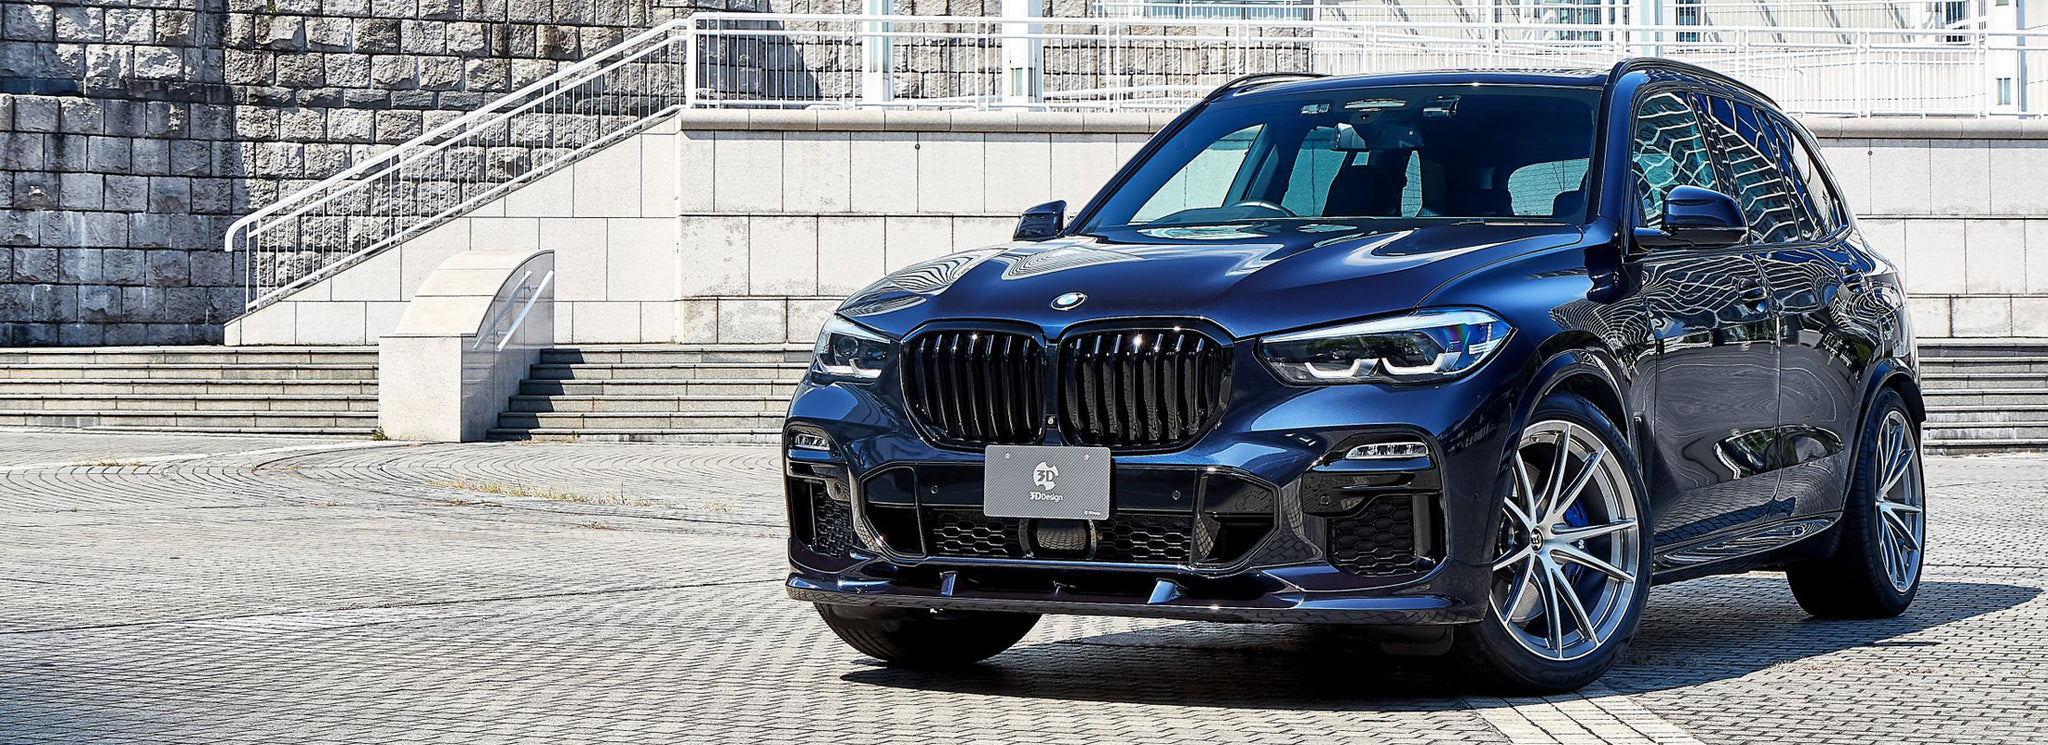 G05 BMW X5 M Sport Tuning Kit from 3D Design Adds Some Style